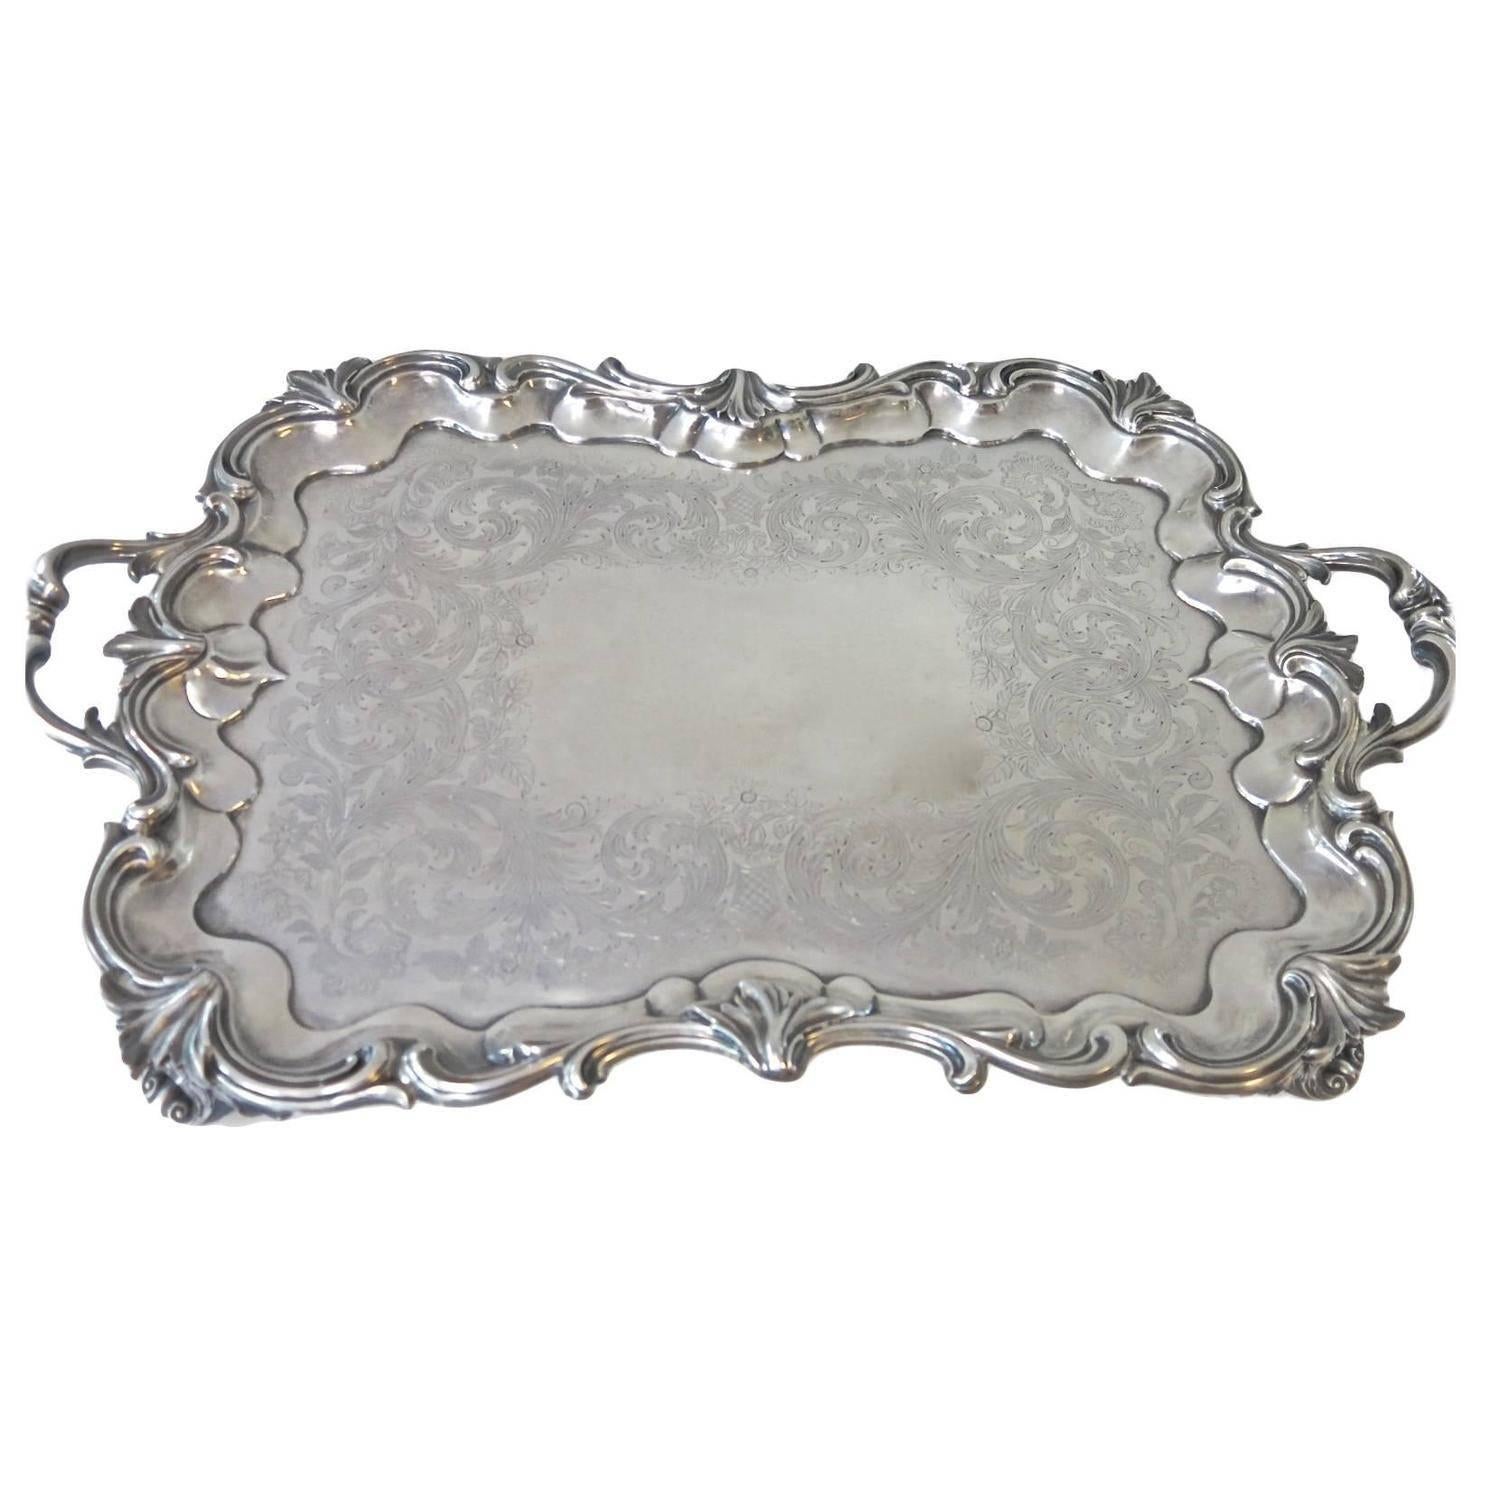 Antique English Sterling Silver Tray Dated 1842 by Emes & Barnard